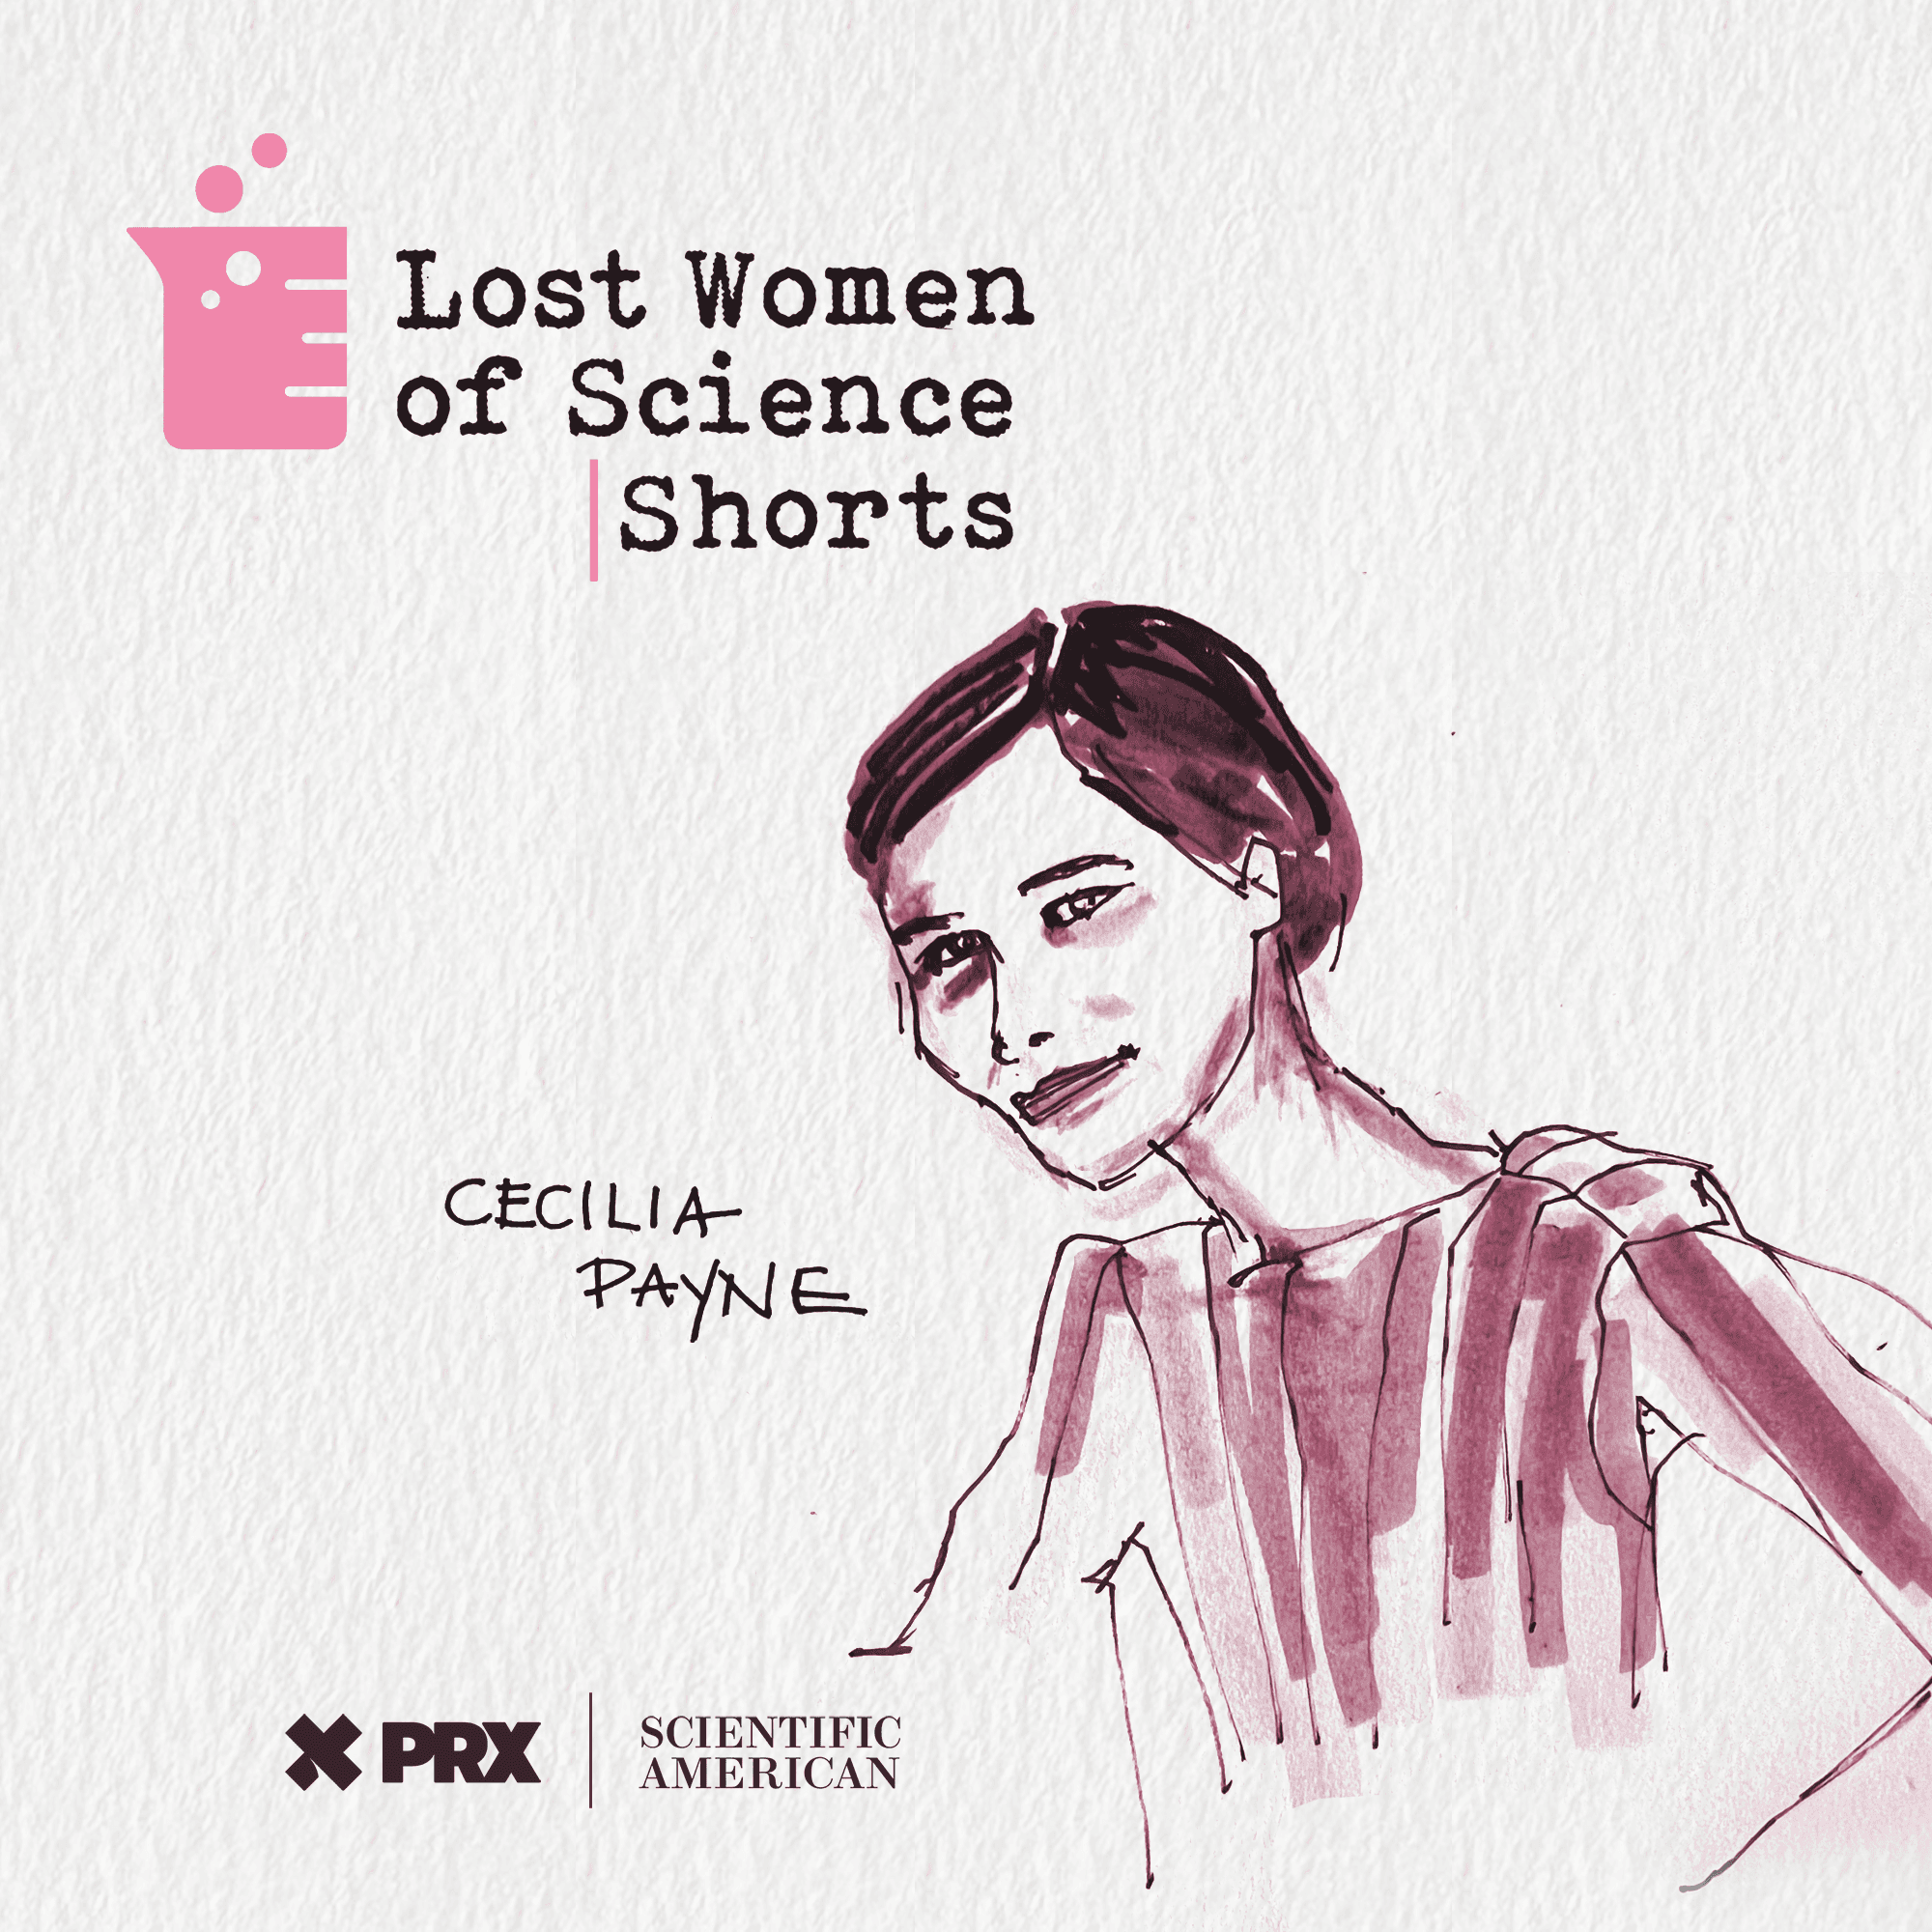 Thumbnail for "The Highest of All Ceilings: Astronomer Cecilia Payne".